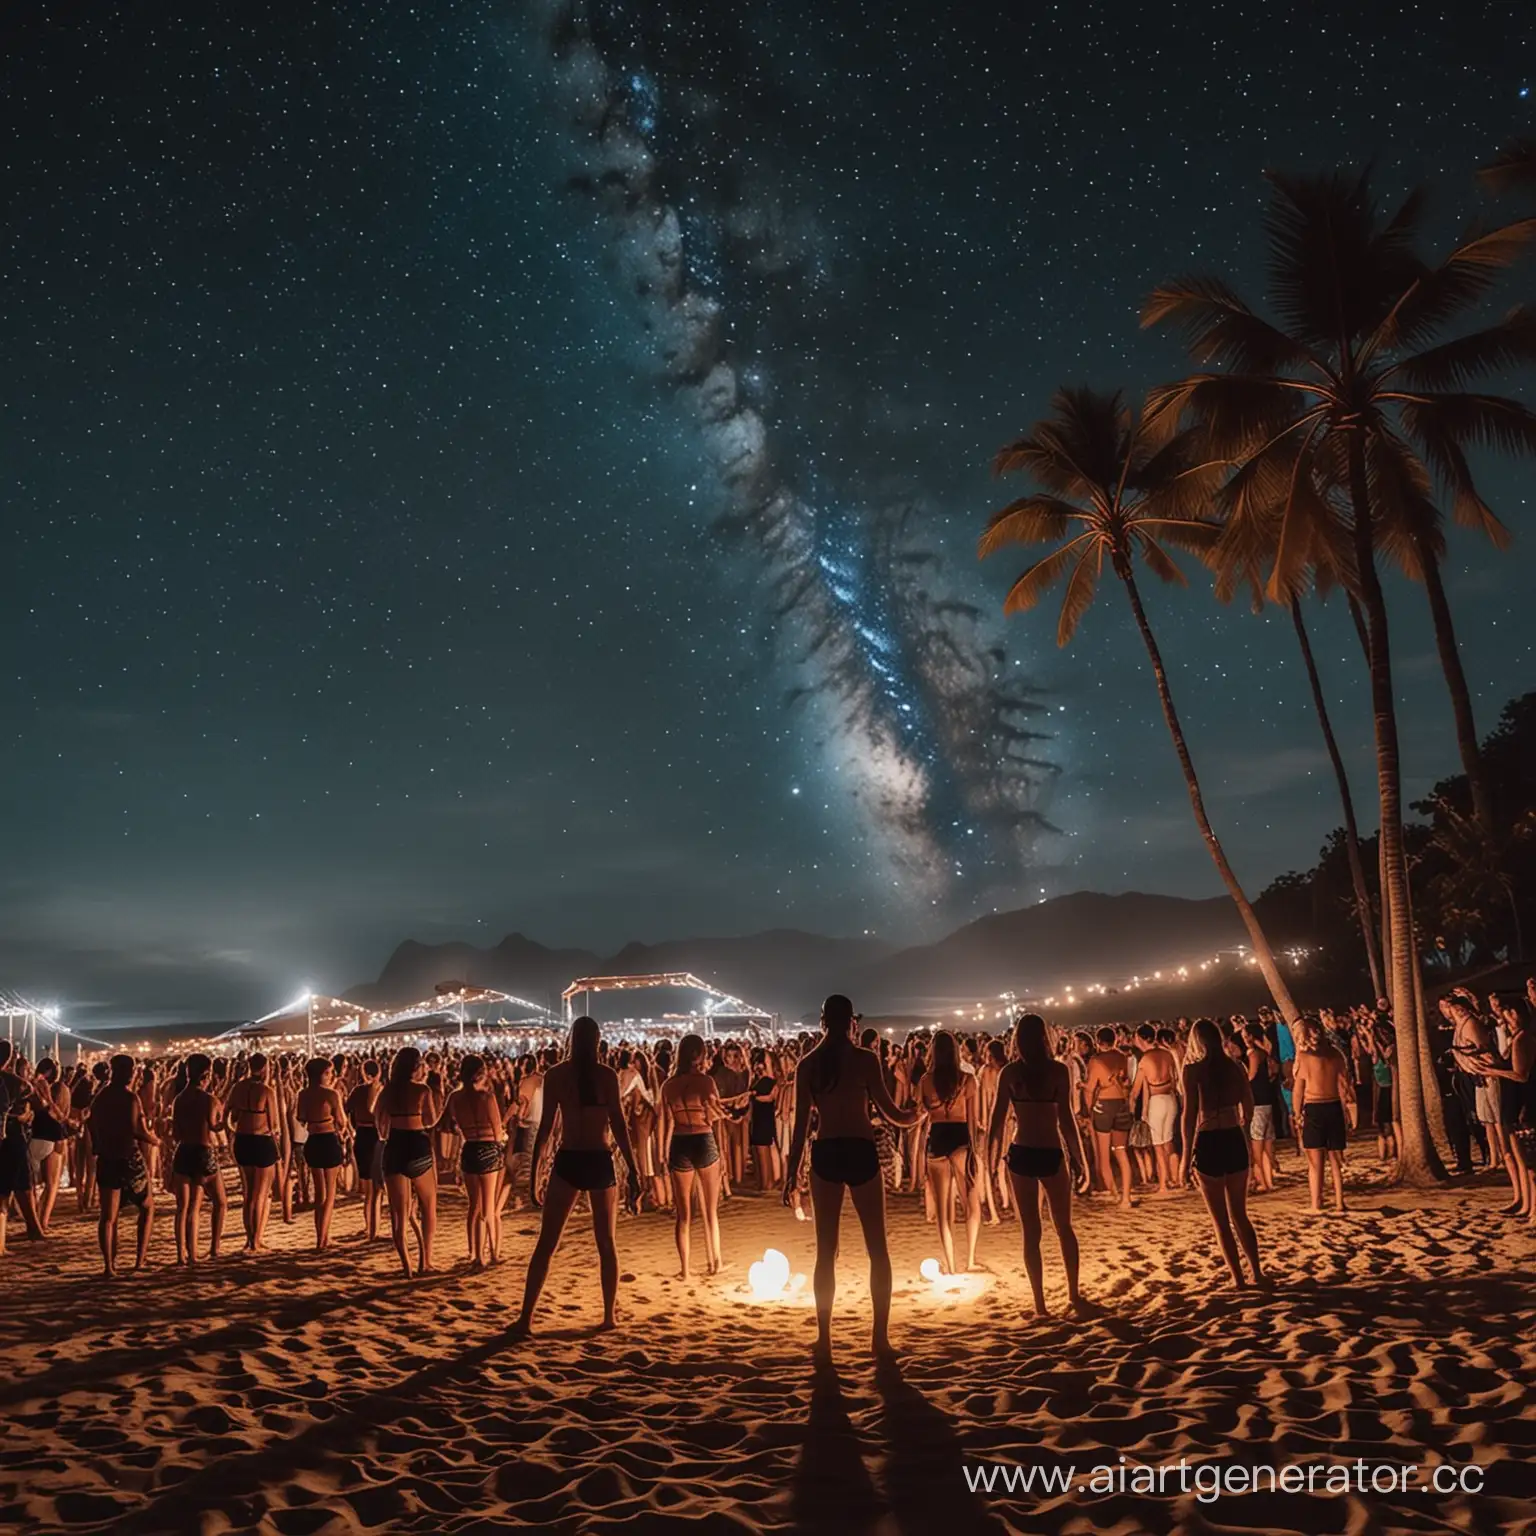 🌟✨ OTHERWORLDLY BEACH RAVE: Dancing Under the Stars ✨🌟

🔊👽👯‍♂️ WHERE WORLDS COLLIDE TO THE RHYTHM OF JUNGLE-TECHNO 🌌🎶

📆 DATE: A Starry Night, [Insert Date]

📍 VENUE: Infinite Beach - The Most Alien Sands at the Edge of Reality

🕰 TIME: From the moment the sun kisses the horizon, until the first rays of a new dawn